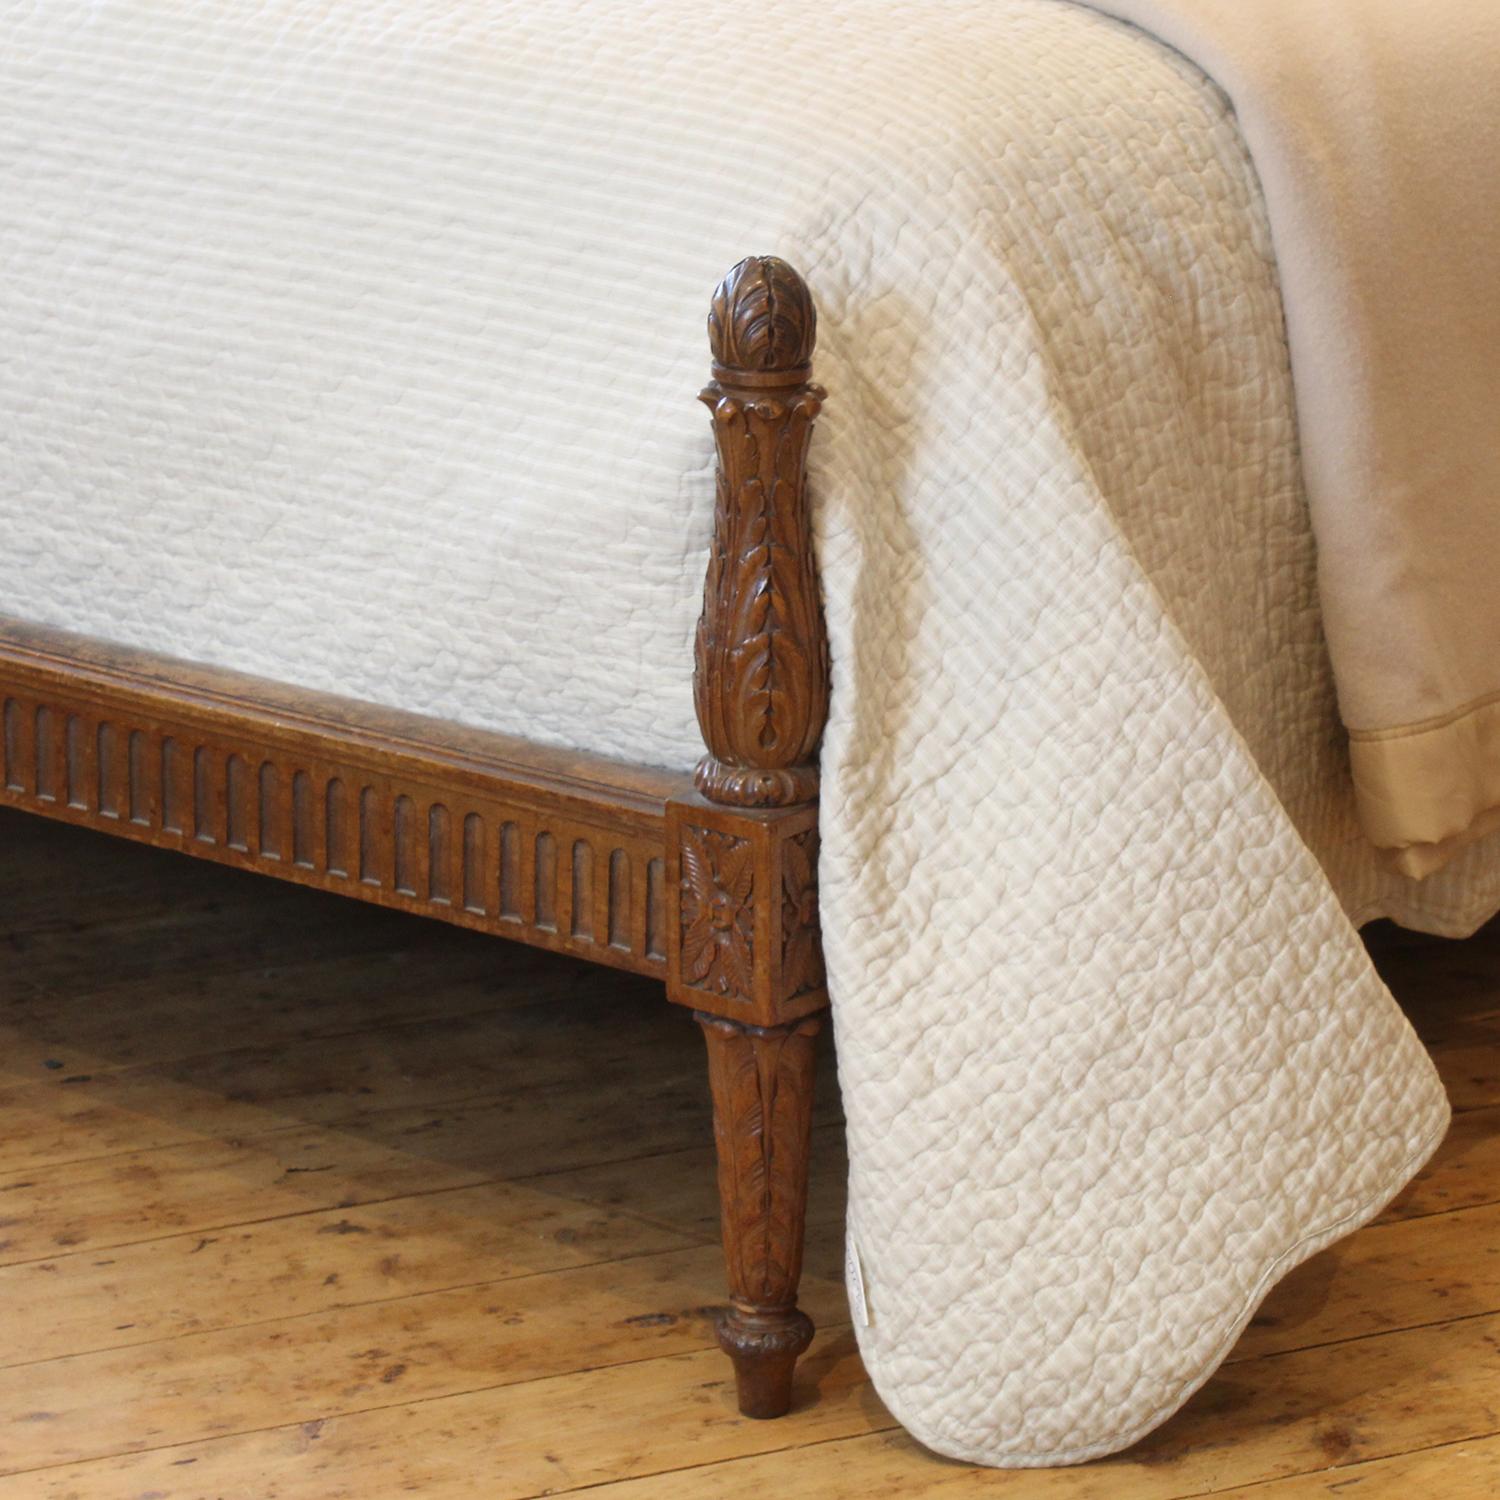 A fine antique bed in walnut with arched back panel upholstered with cherub fabric, and torchon foot.

This bed accepts a British king size or American queen size, 5ft wide (60 inches or 150cm) base and mattress set, with an overlap (as